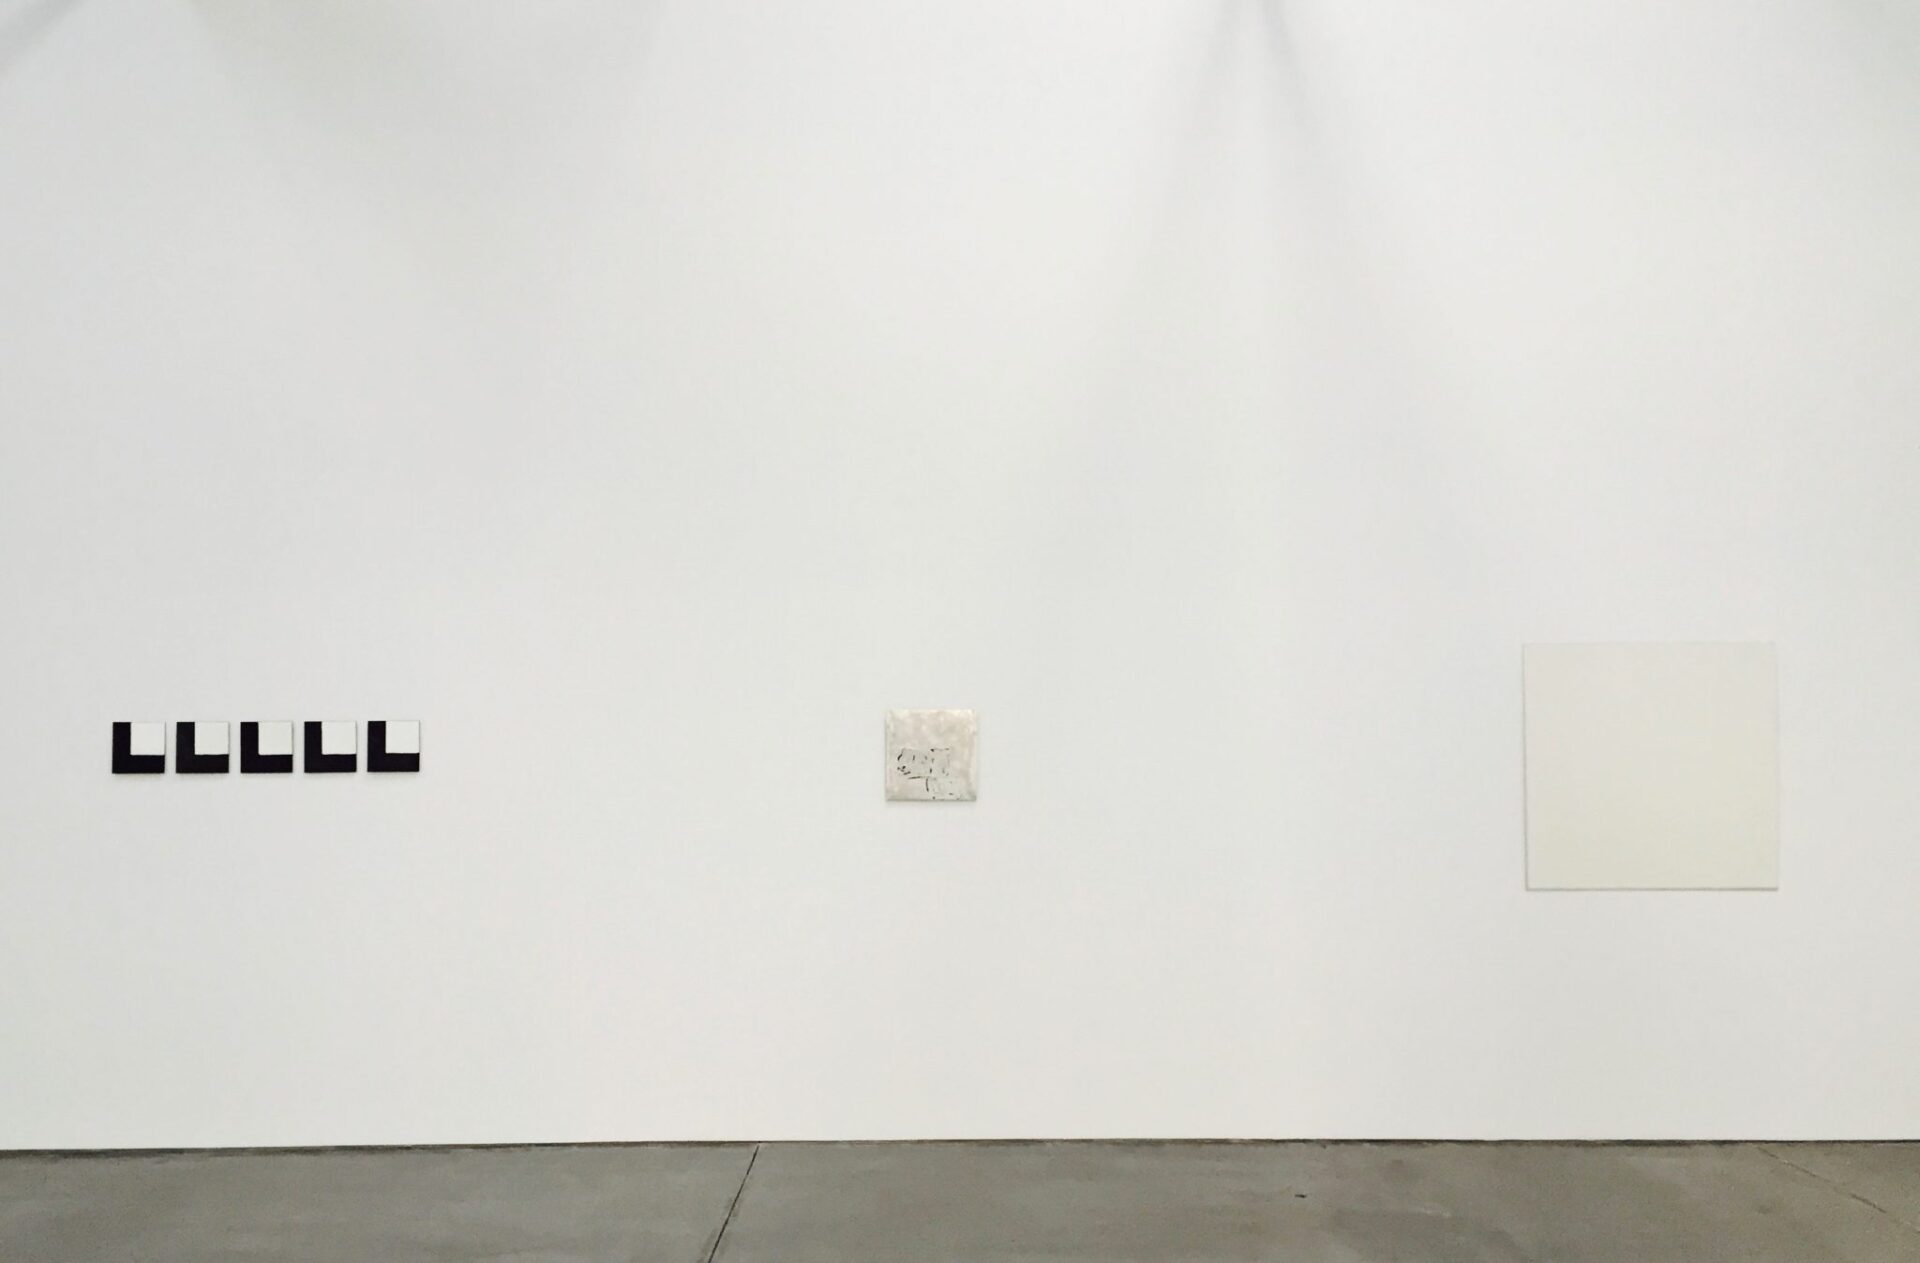 Robert Ryman. Gallery 2, installation view of the south wall. Ryman used manifold ways of distributing paint on a surface, including firing. The work on the left, Untitled, 1973, consists of double-baked vitreous enamel on oxidized copper. 